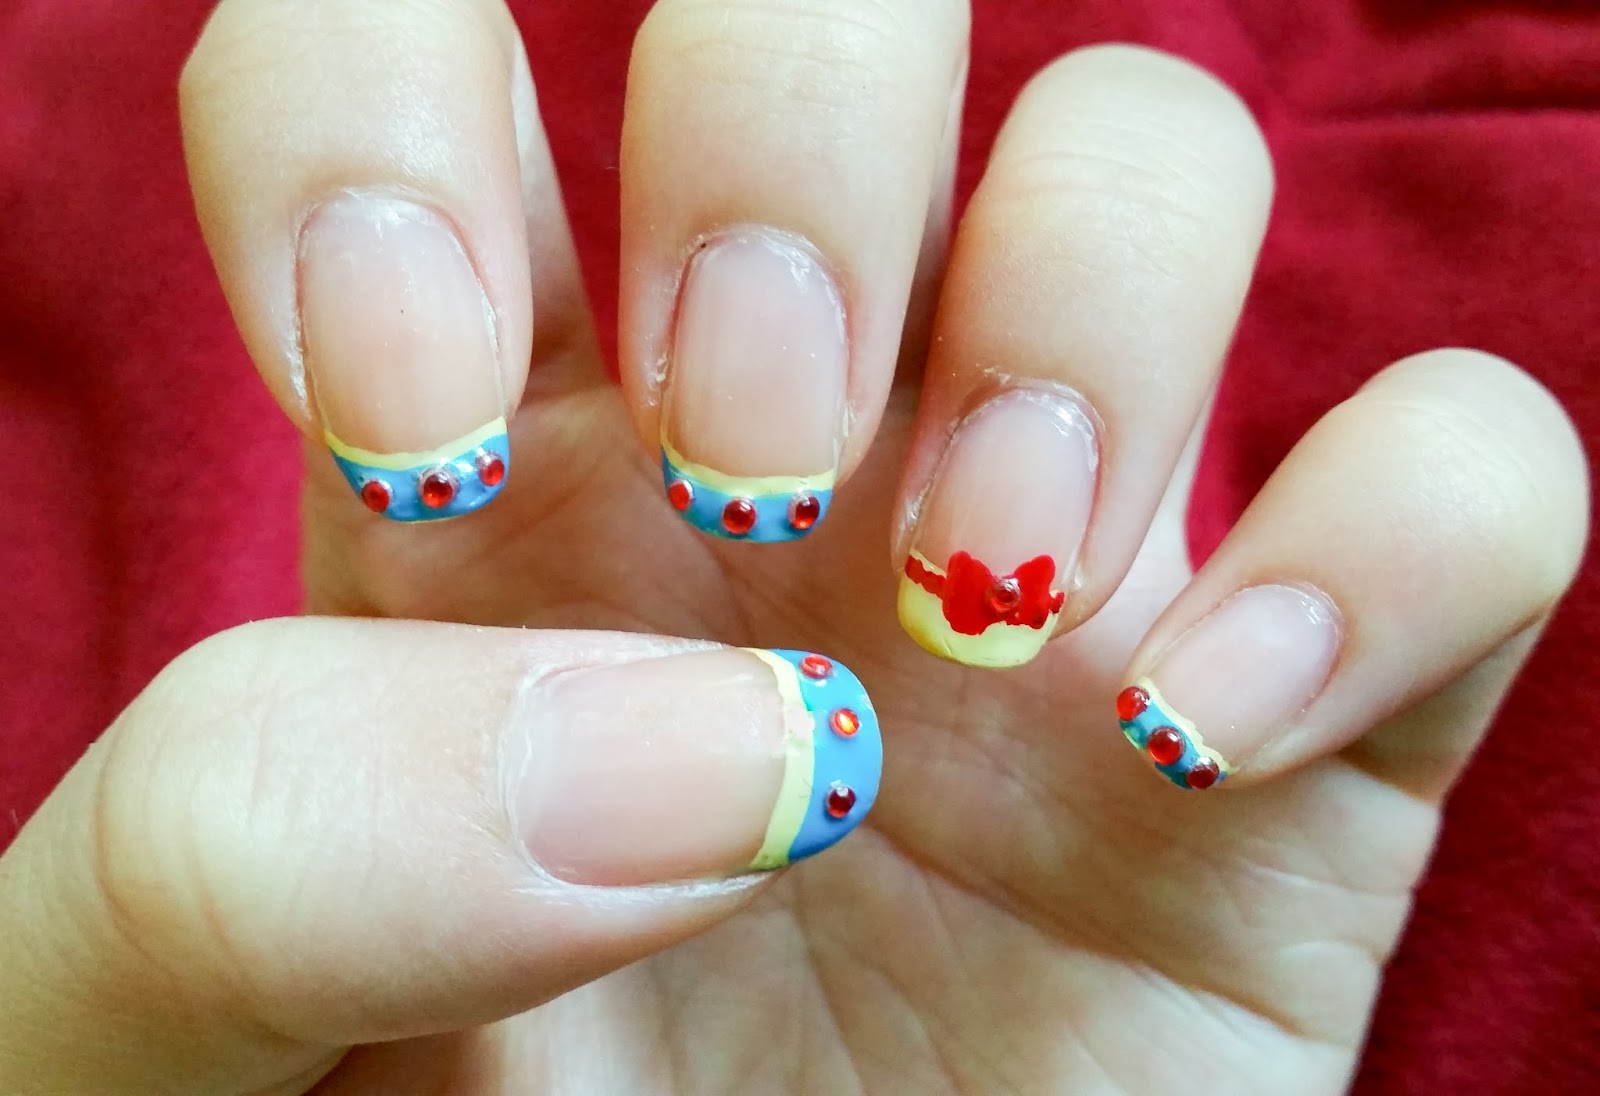 Snow White Manicure on Female Hands. Winter Nail Design Stock Image - Image  of female, bright: 60749741